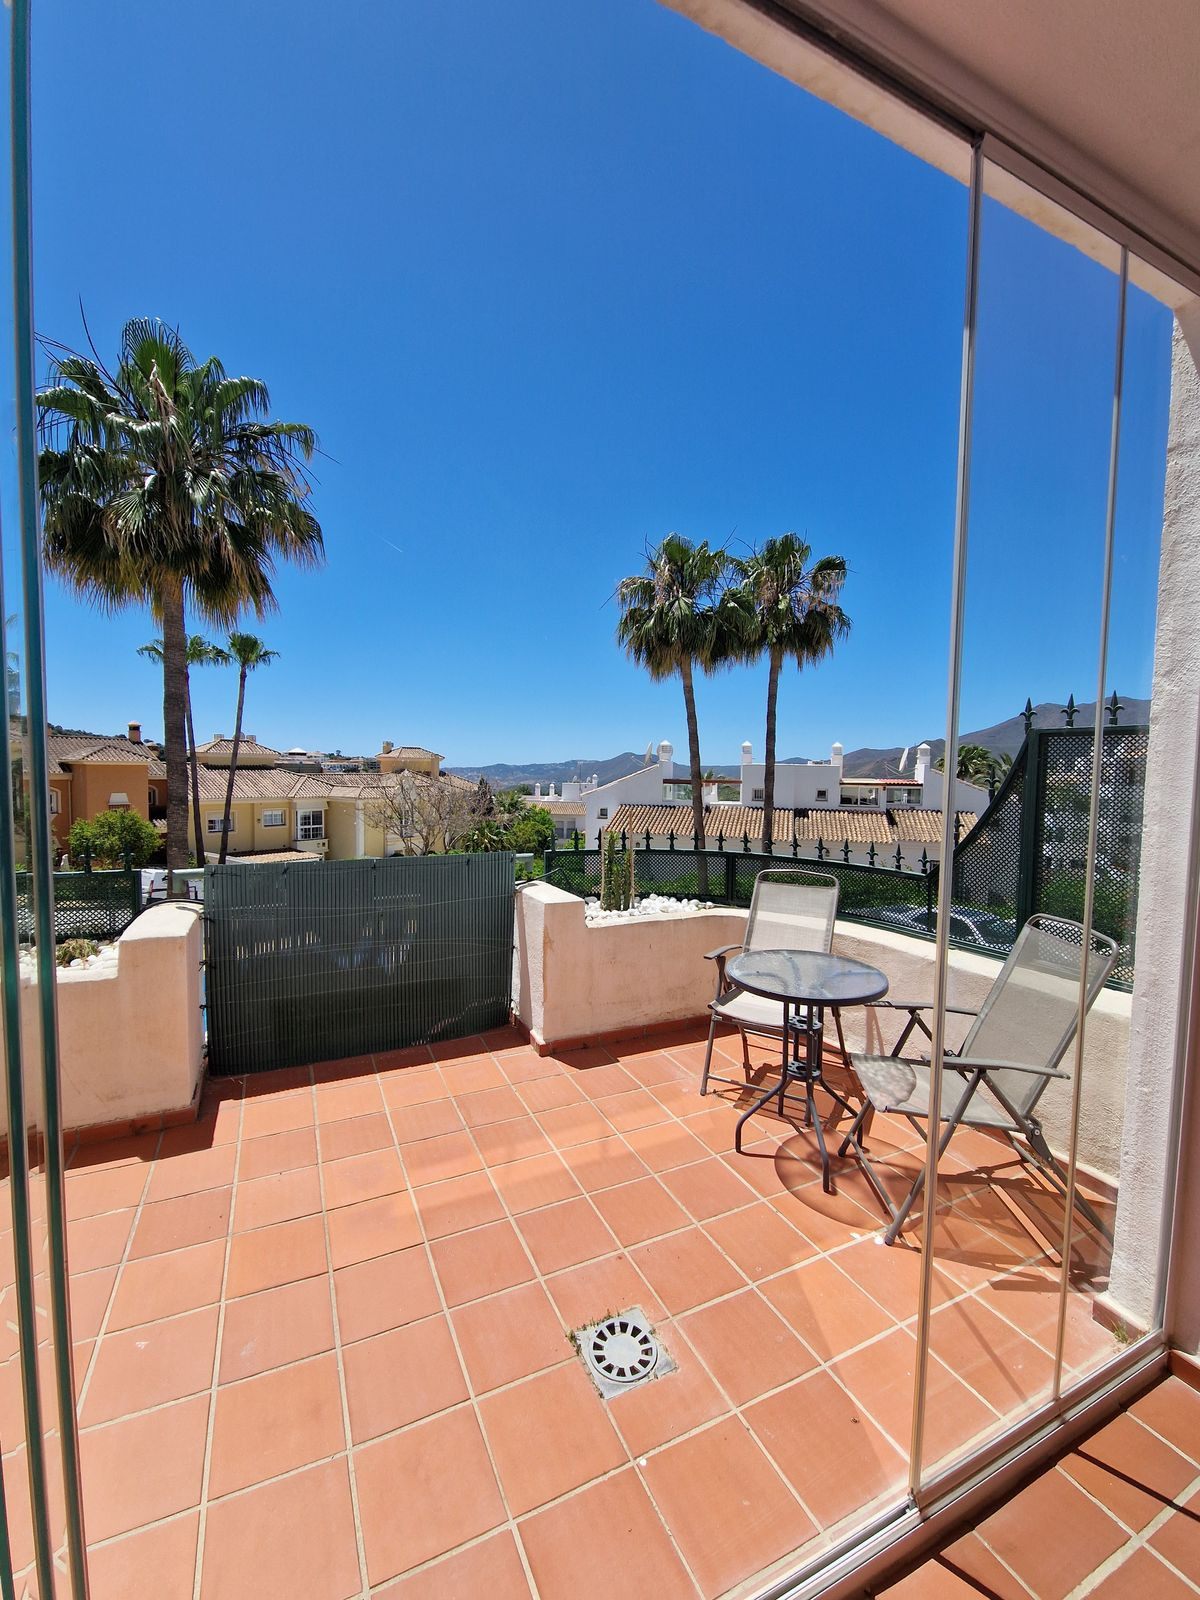 Townhouse Terraced in Alhaurin Golf, Costa del Sol
